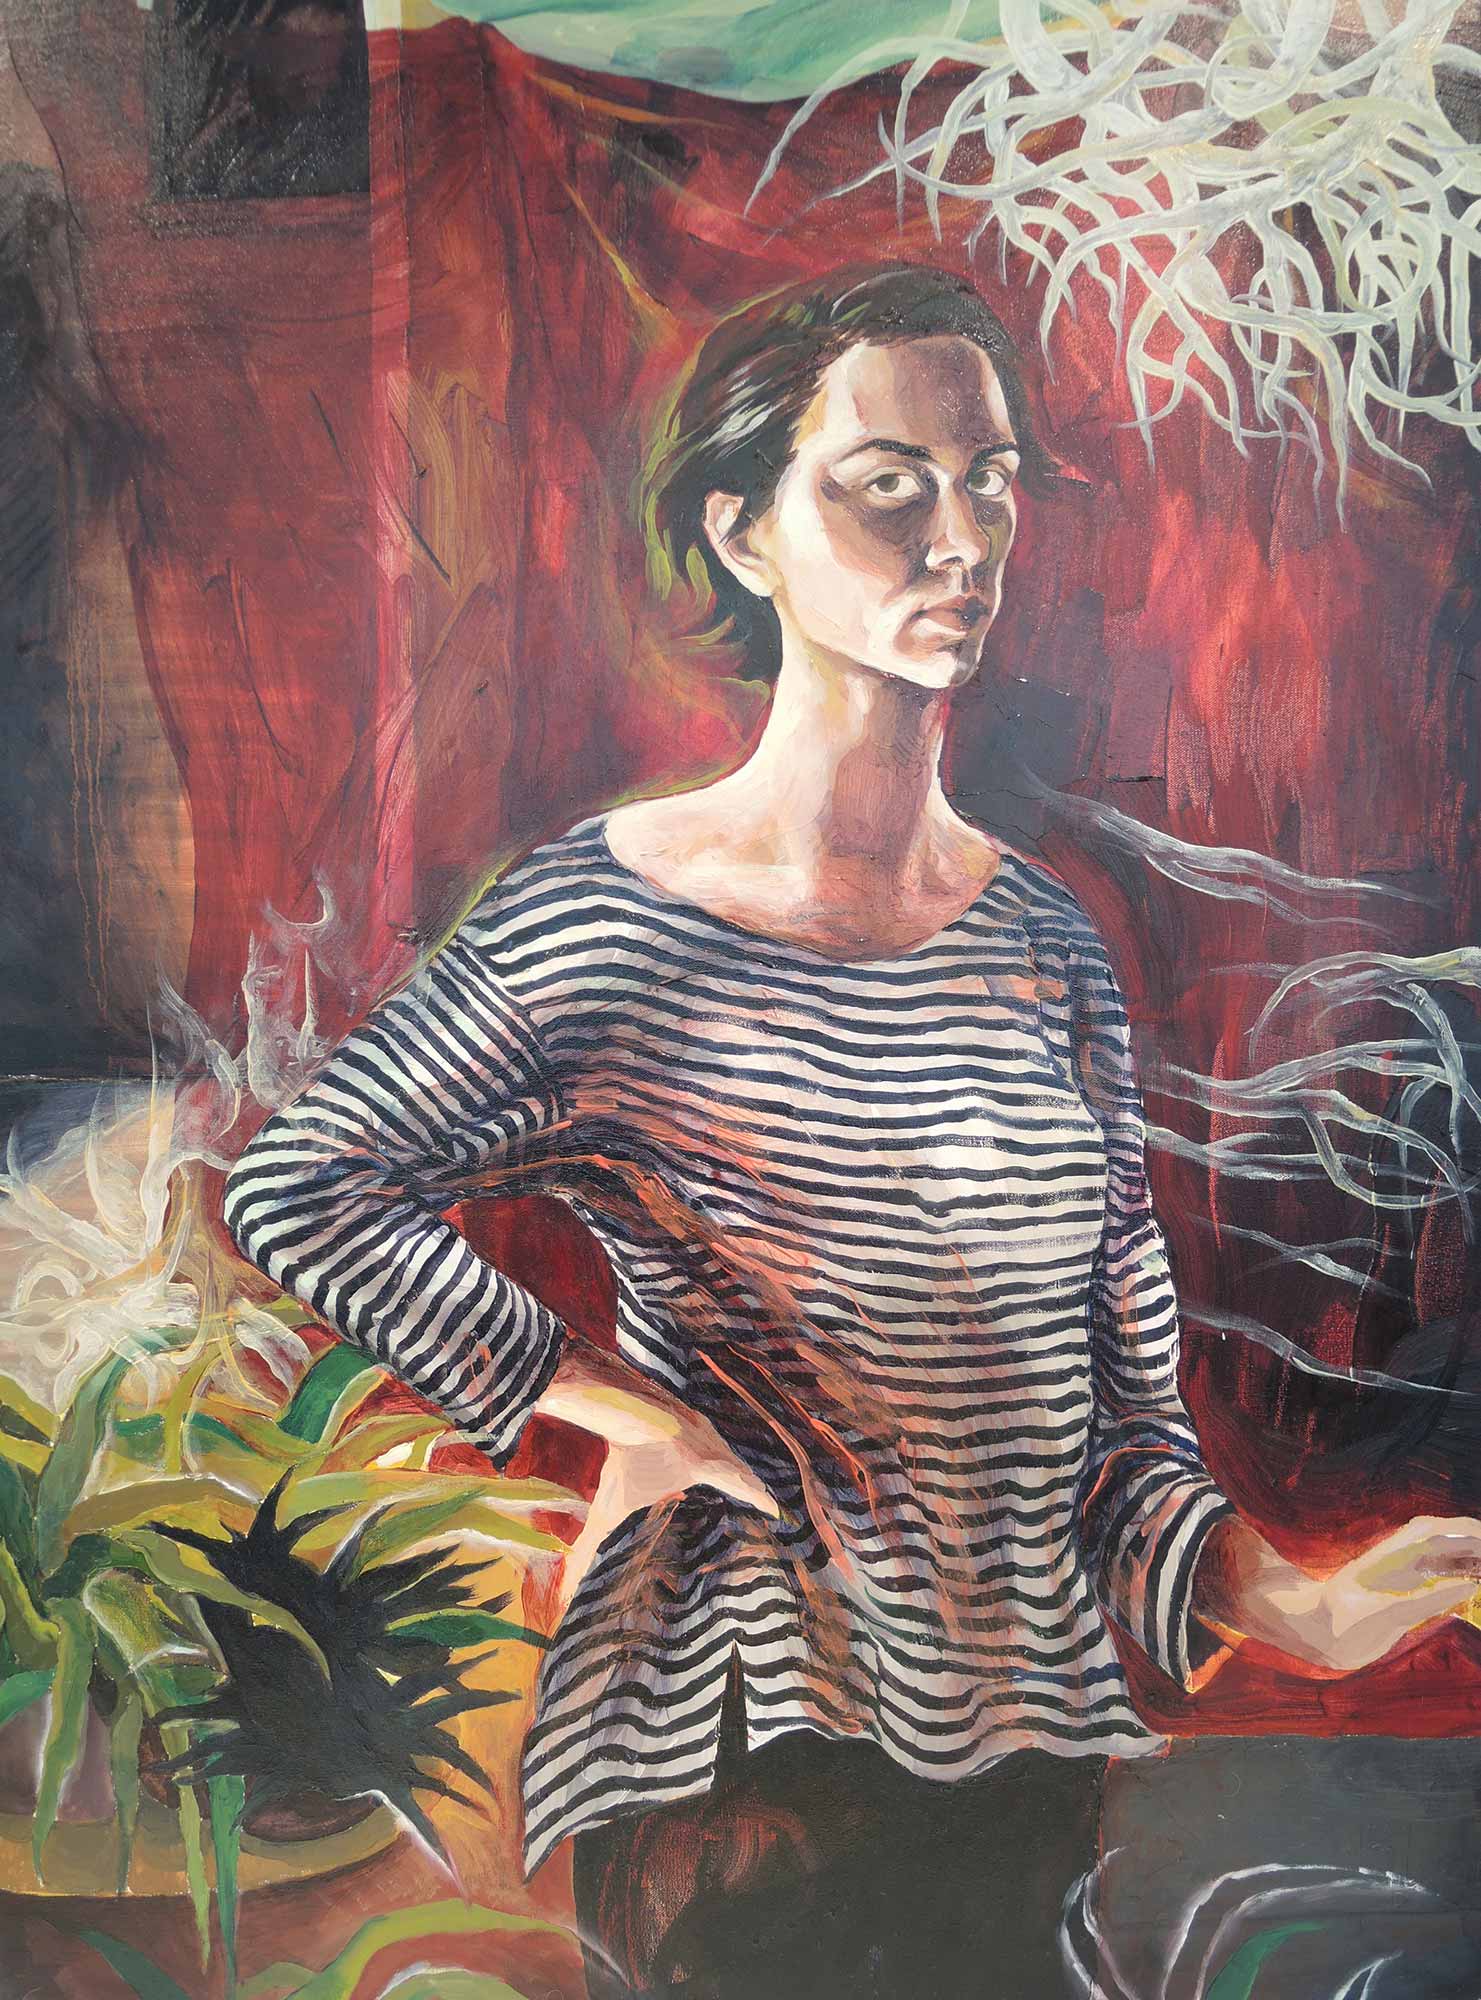 A painting by Oonagh Carroll Warhola of a woman standing